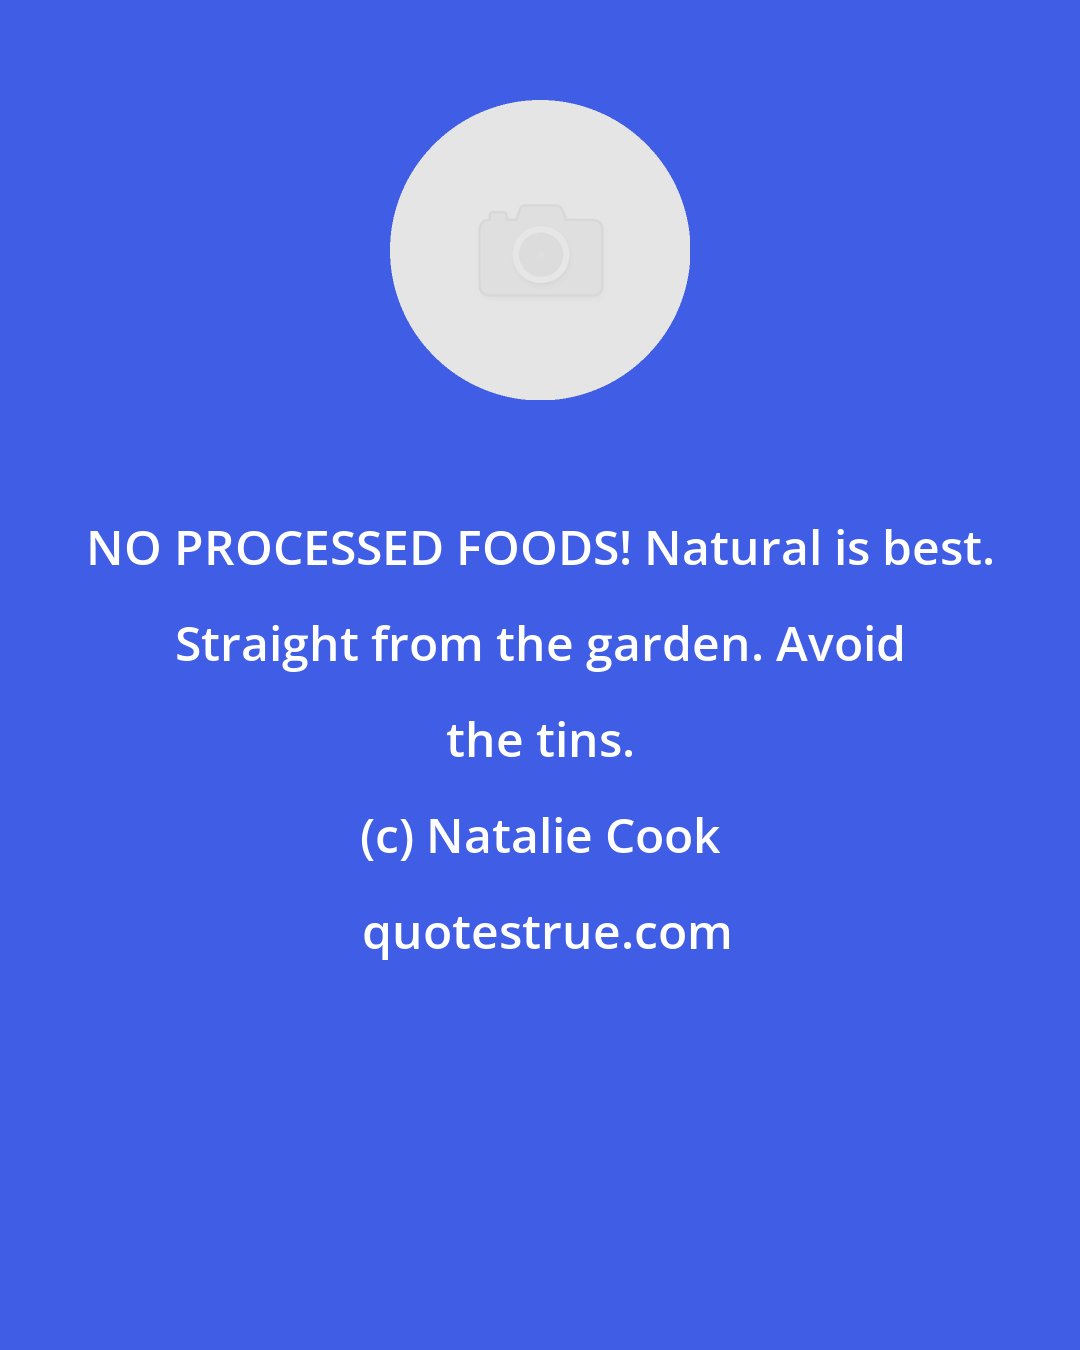 Natalie Cook: NO PROCESSED FOODS! Natural is best. Straight from the garden. Avoid the tins.